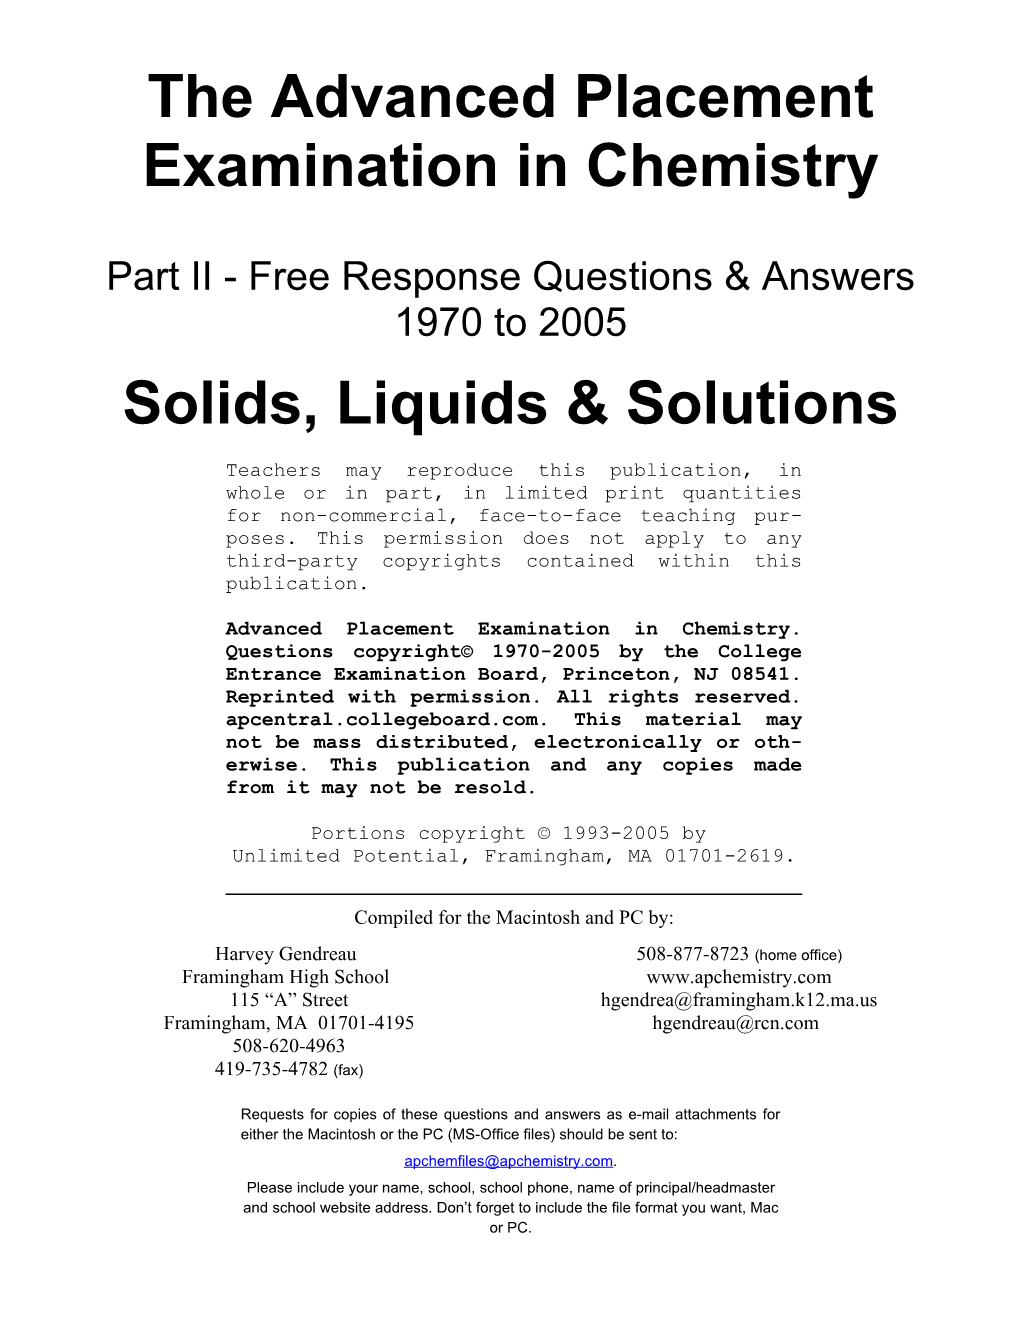 The Advanced Placement Examination in Chemistry s2